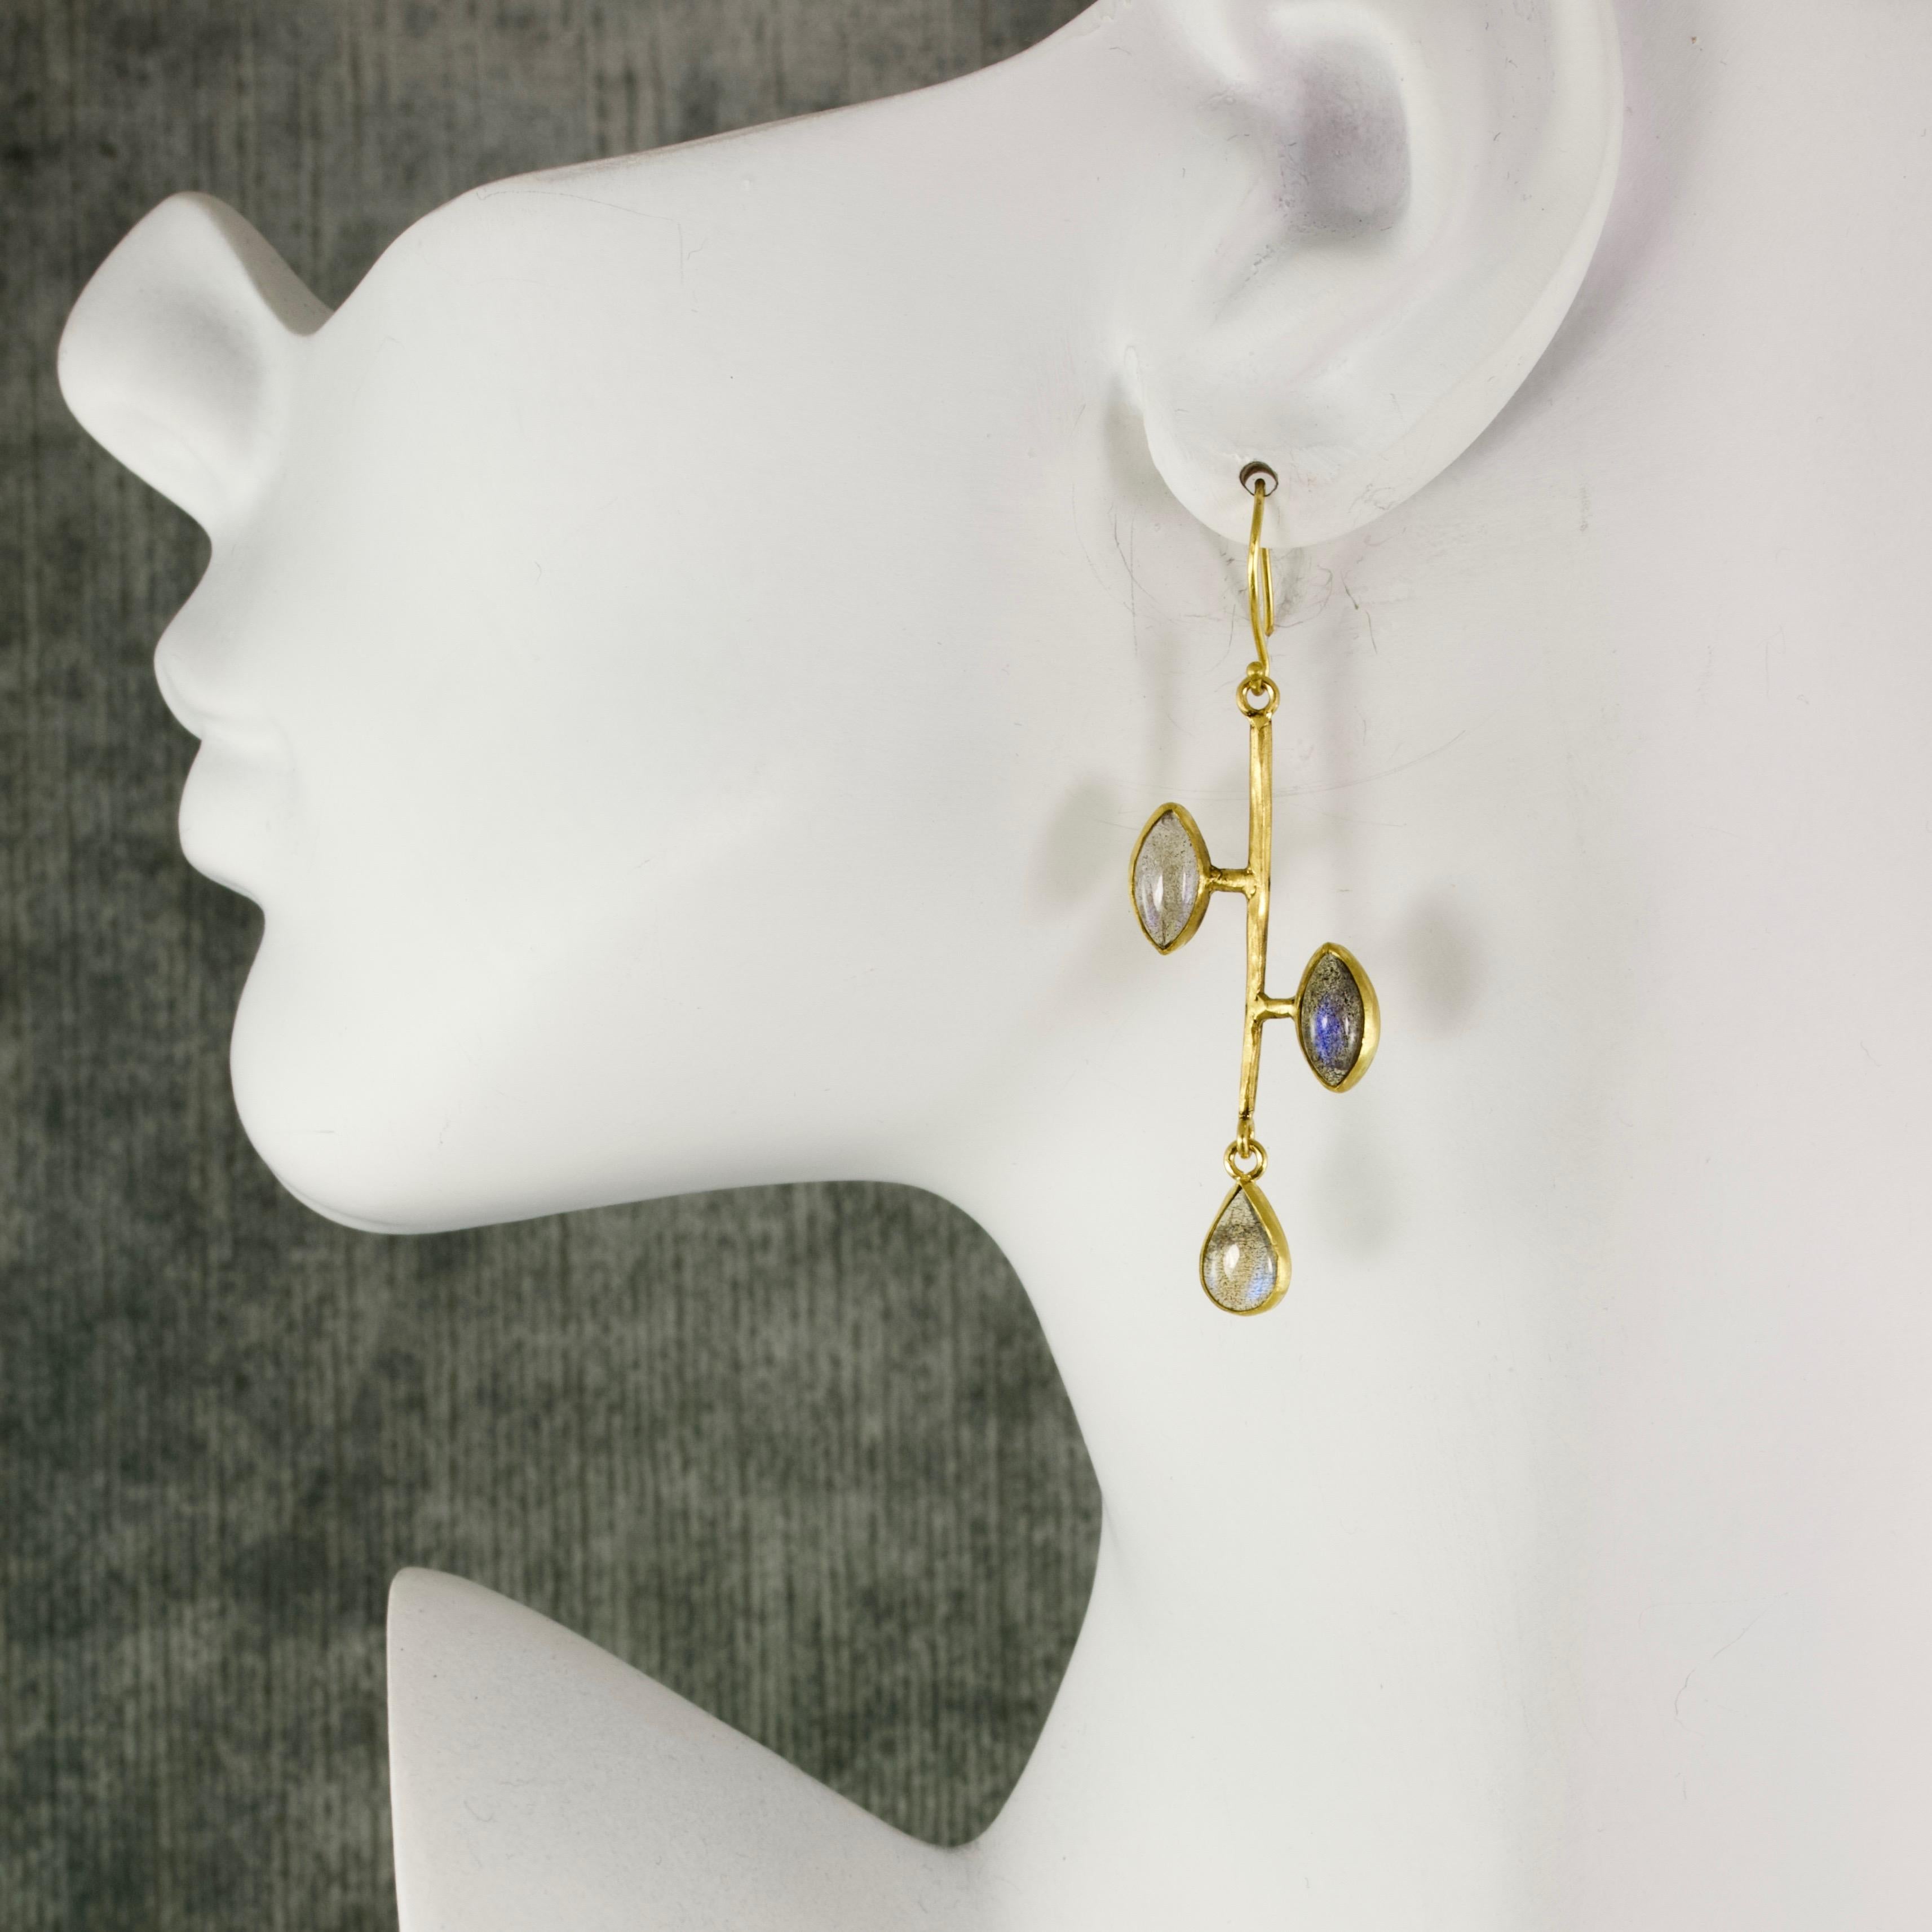 Almond shaped, luminescent labradorite cabachons are set asymmetrically on these stick earrings, wrapped in matte 22k gold with a teardrop, bezel set labradorite hanging freely at the bottom.  This Bauhaus inspired pair is part of our Orpheus